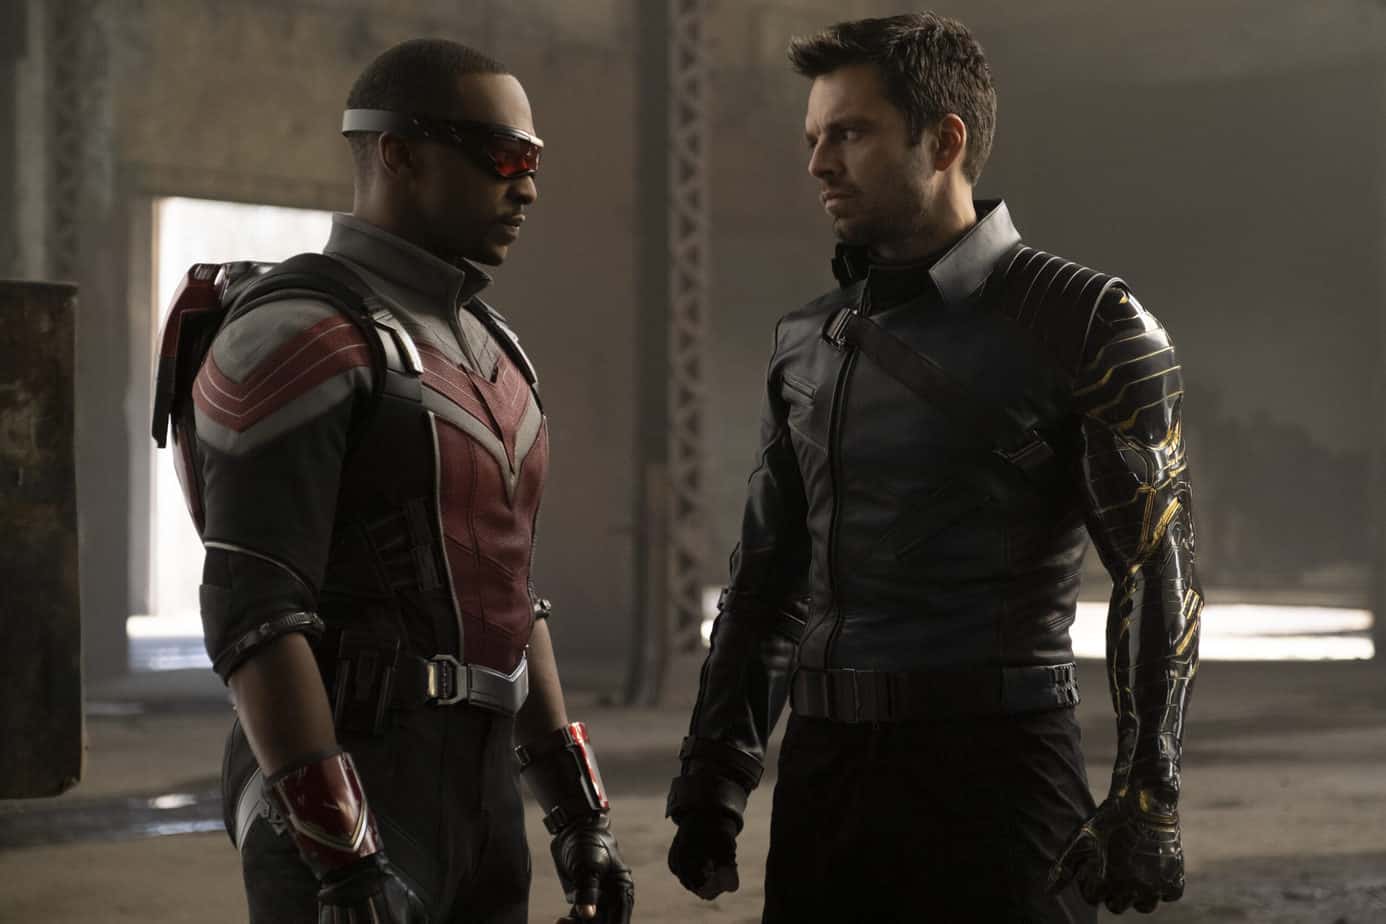 THE FALCON AND THE WINTER SOLDIER marvel series runtimes and series episode length